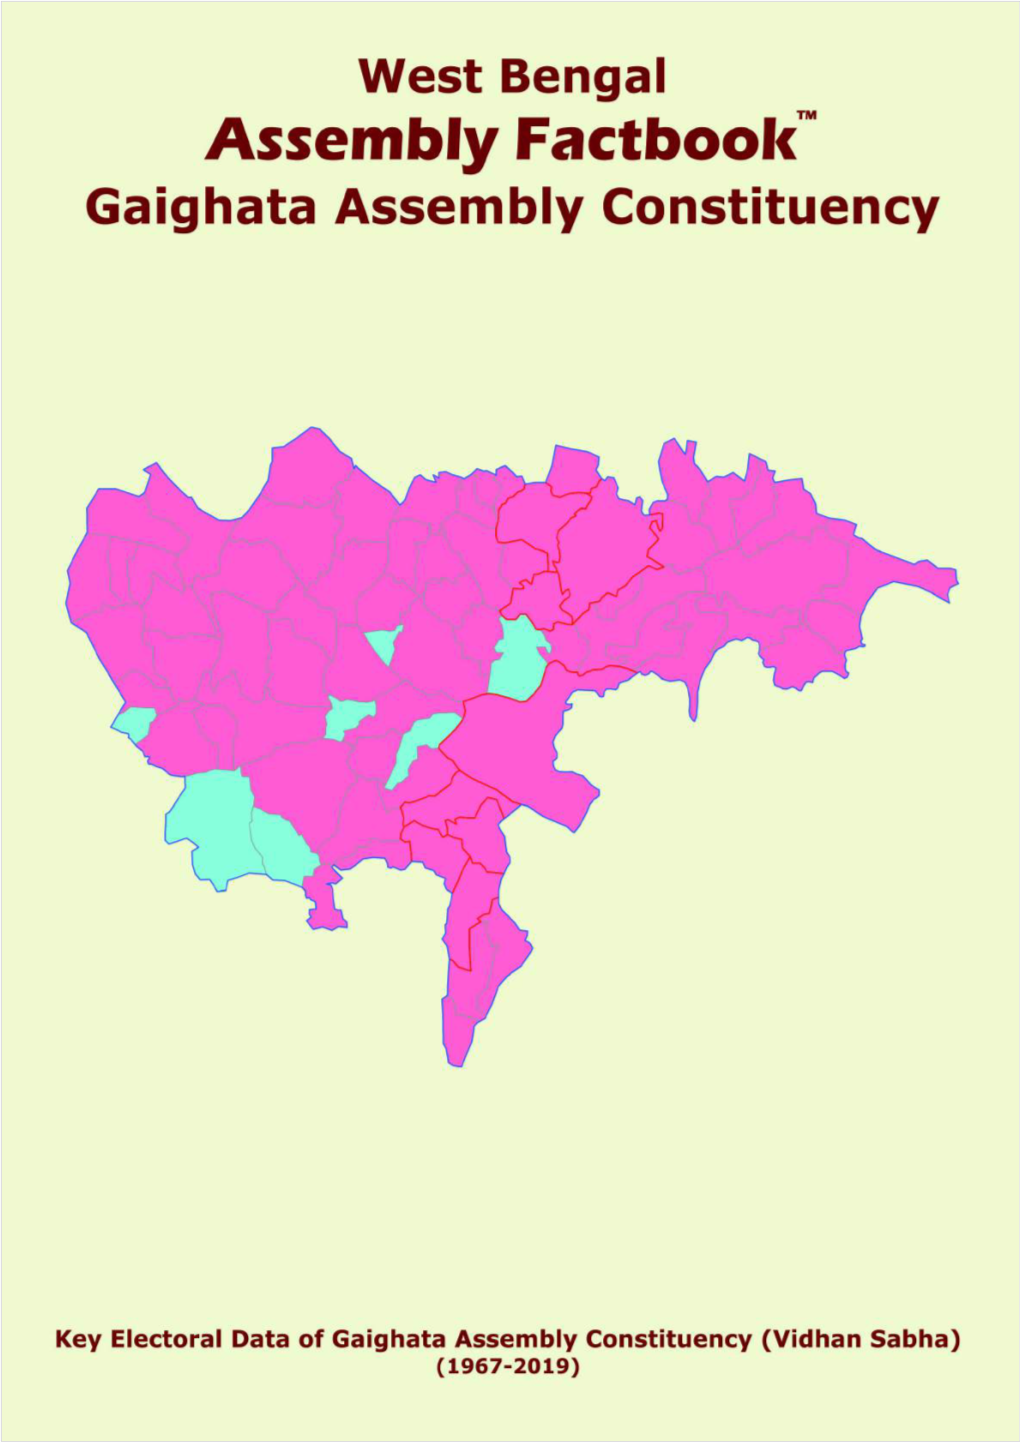 Gaighata Assembly West Bengal Factbook